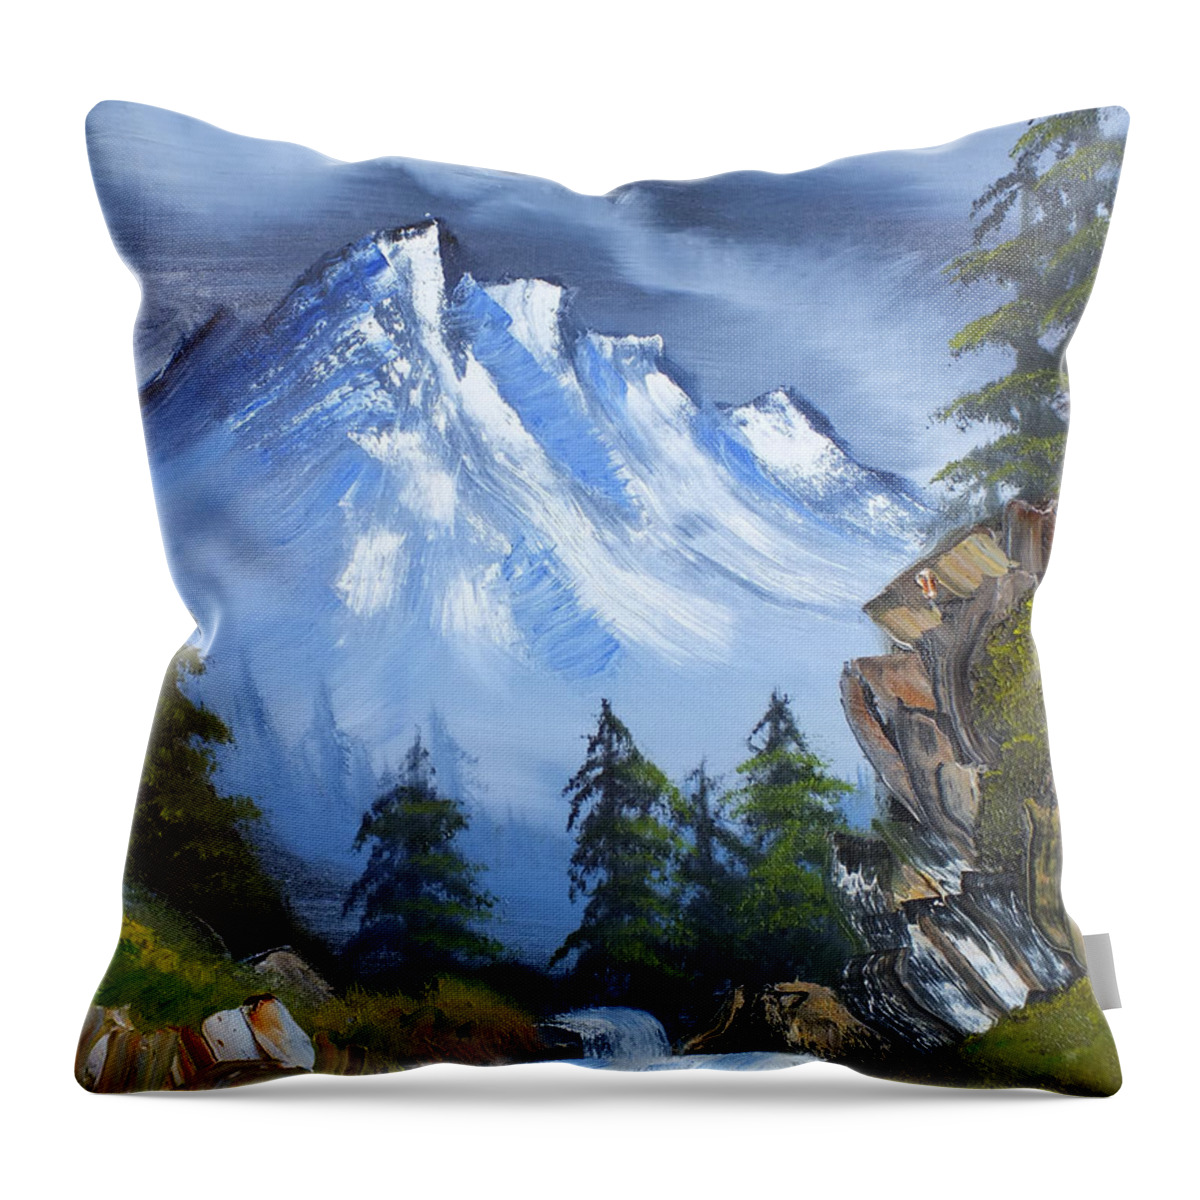 Snow Throw Pillow featuring the painting Glory Mountain by Yenni Harrison